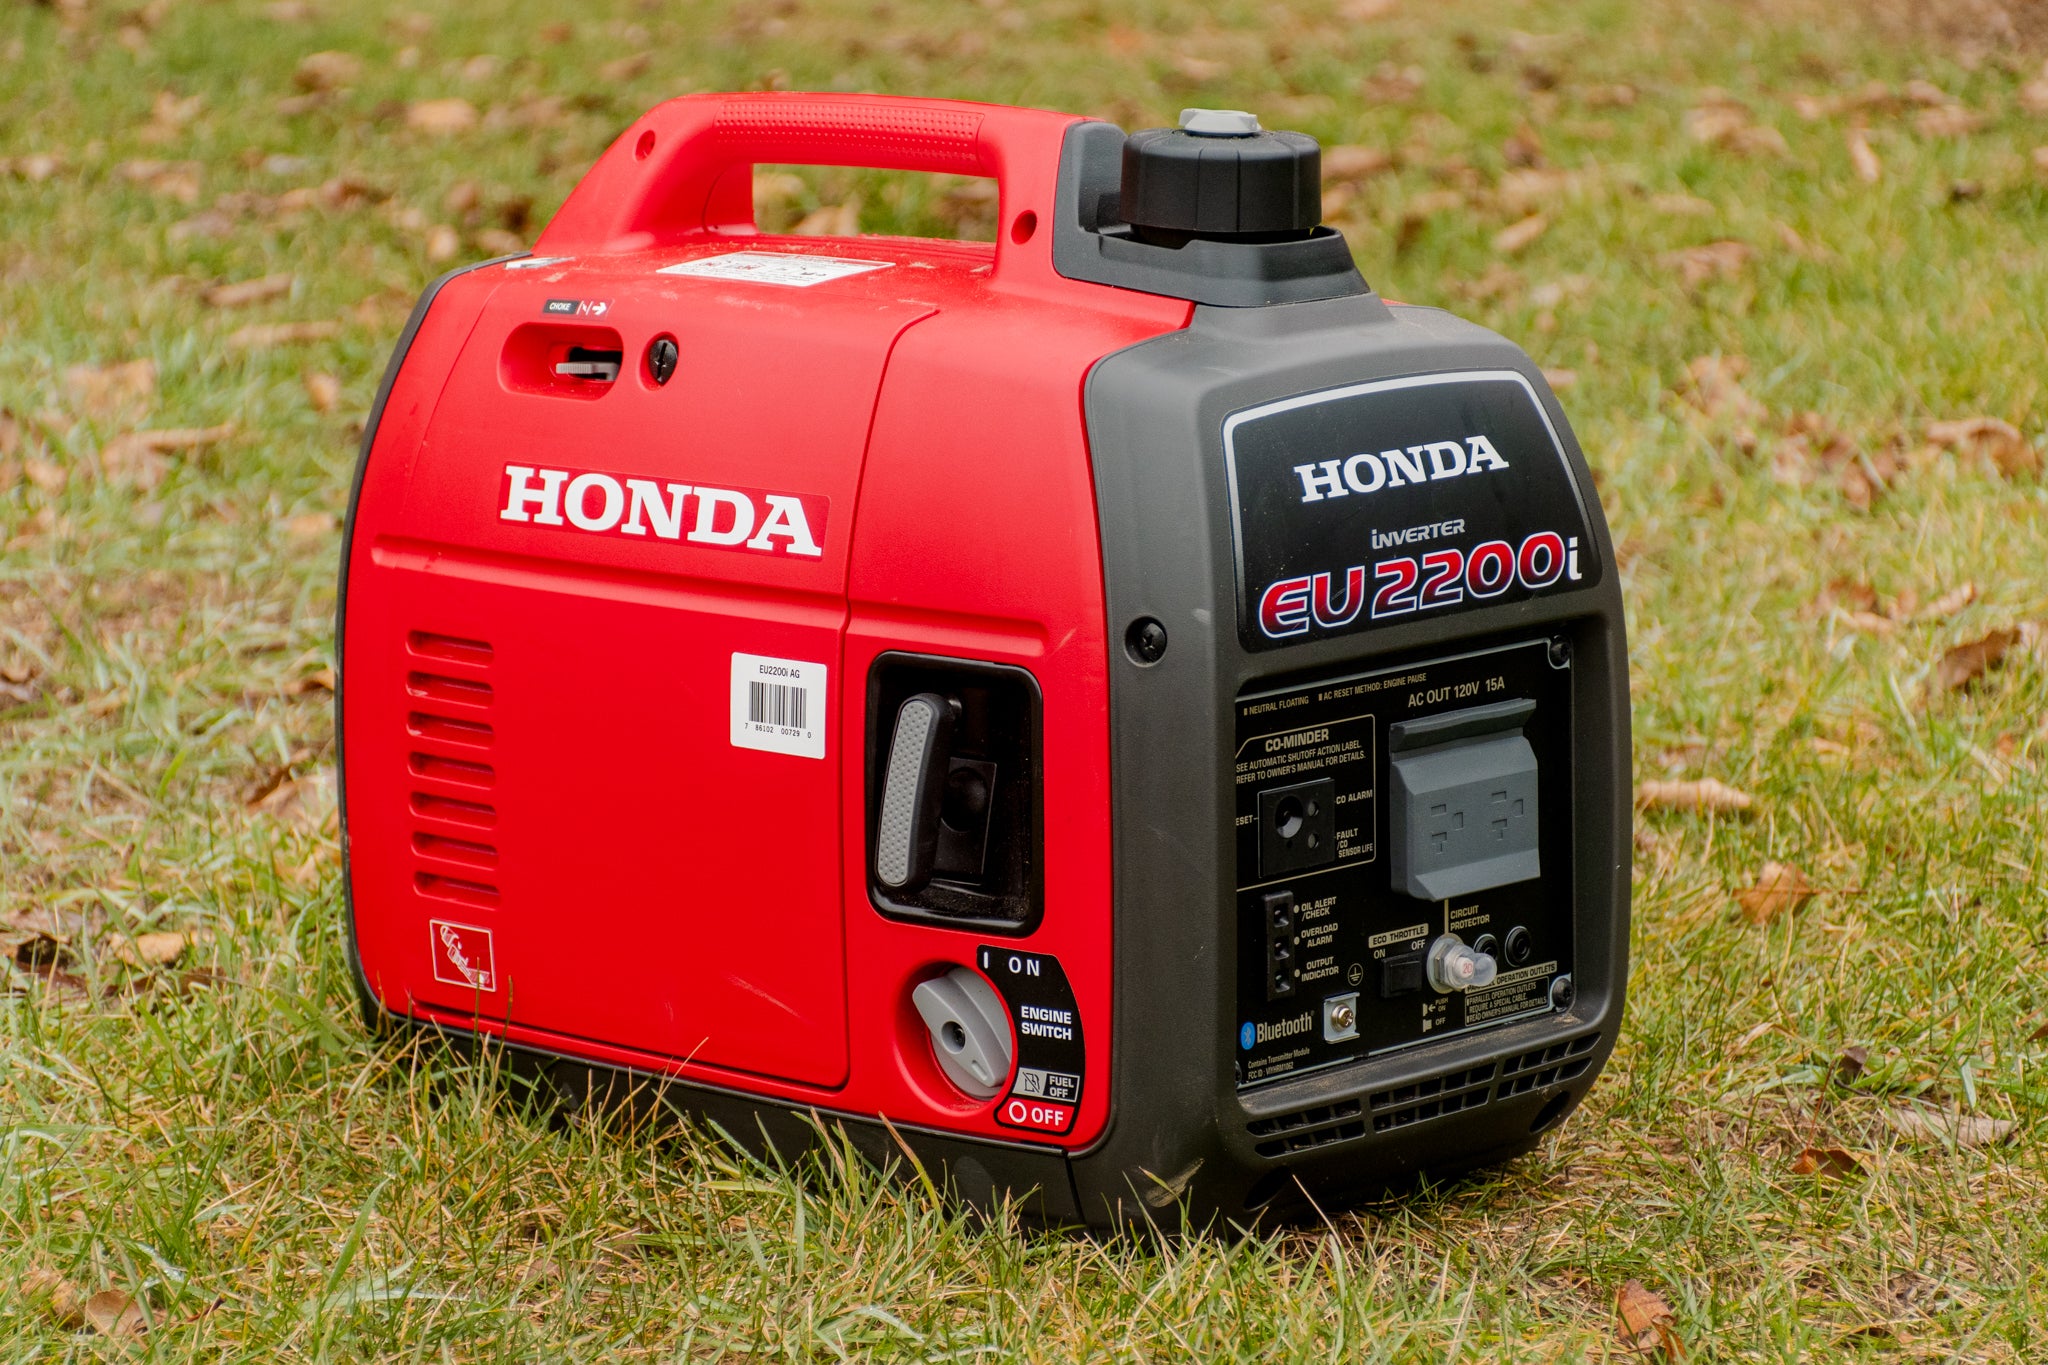 Factors To Consider Before Buying A 2200 Generator